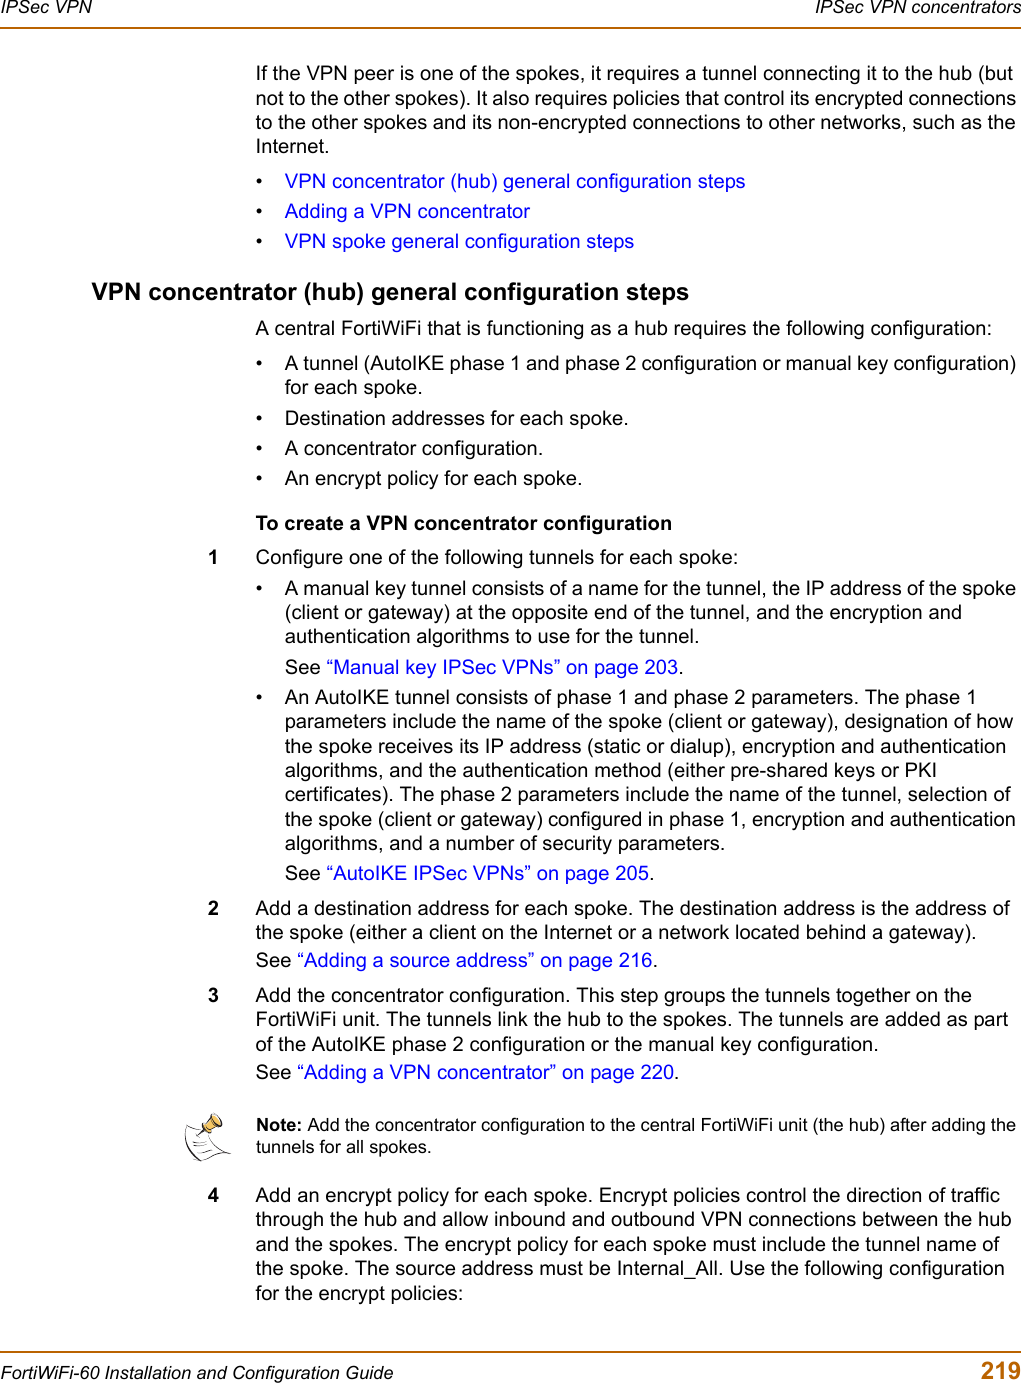 IPSec VPN  IPSec VPN concentratorsFortiWiFi-60 Installation and Configuration Guide  219If the VPN peer is one of the spokes, it requires a tunnel connecting it to the hub (but not to the other spokes). It also requires policies that control its encrypted connections to the other spokes and its non-encrypted connections to other networks, such as the Internet. •VPN concentrator (hub) general configuration steps•Adding a VPN concentrator•VPN spoke general configuration stepsVPN concentrator (hub) general configuration stepsA central FortiWiFi that is functioning as a hub requires the following configuration:• A tunnel (AutoIKE phase 1 and phase 2 configuration or manual key configuration) for each spoke. • Destination addresses for each spoke.• A concentrator configuration.• An encrypt policy for each spoke. To create a VPN concentrator configuration1Configure one of the following tunnels for each spoke:• A manual key tunnel consists of a name for the tunnel, the IP address of the spoke (client or gateway) at the opposite end of the tunnel, and the encryption and authentication algorithms to use for the tunnel. See “Manual key IPSec VPNs” on page 203.• An AutoIKE tunnel consists of phase 1 and phase 2 parameters. The phase 1 parameters include the name of the spoke (client or gateway), designation of how the spoke receives its IP address (static or dialup), encryption and authentication algorithms, and the authentication method (either pre-shared keys or PKI certificates). The phase 2 parameters include the name of the tunnel, selection of the spoke (client or gateway) configured in phase 1, encryption and authentication algorithms, and a number of security parameters. See “AutoIKE IPSec VPNs” on page 205.2Add a destination address for each spoke. The destination address is the address of the spoke (either a client on the Internet or a network located behind a gateway).See “Adding a source address” on page 216.3Add the concentrator configuration. This step groups the tunnels together on the FortiWiFi unit. The tunnels link the hub to the spokes. The tunnels are added as part of the AutoIKE phase 2 configuration or the manual key configuration. See “Adding a VPN concentrator” on page 220.4Add an encrypt policy for each spoke. Encrypt policies control the direction of traffic through the hub and allow inbound and outbound VPN connections between the hub and the spokes. The encrypt policy for each spoke must include the tunnel name of the spoke. The source address must be Internal_All. Use the following configuration for the encrypt policies:Note: Add the concentrator configuration to the central FortiWiFi unit (the hub) after adding the tunnels for all spokes. 